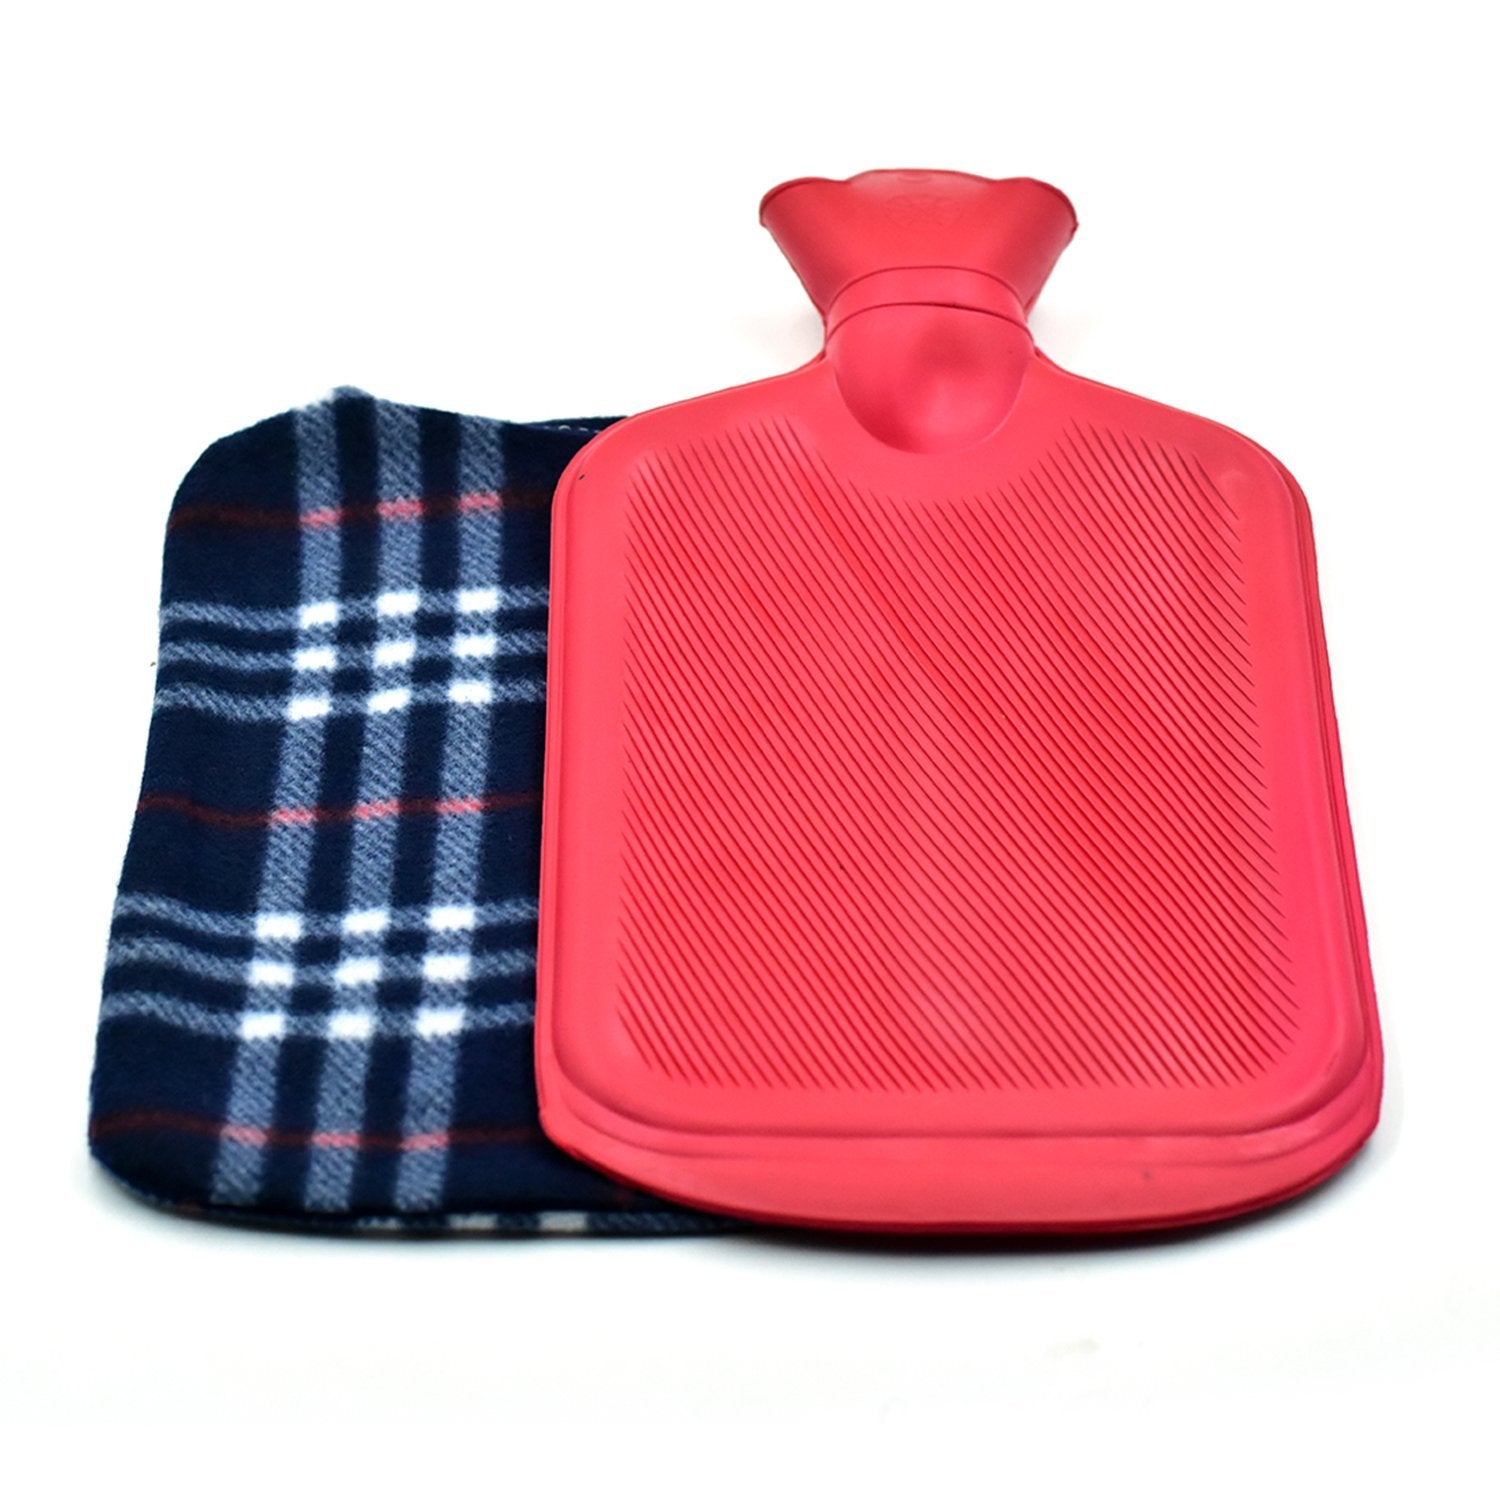 6076 (Large) Rubber Hot Water Heating Bag With Cover for Pain Relief